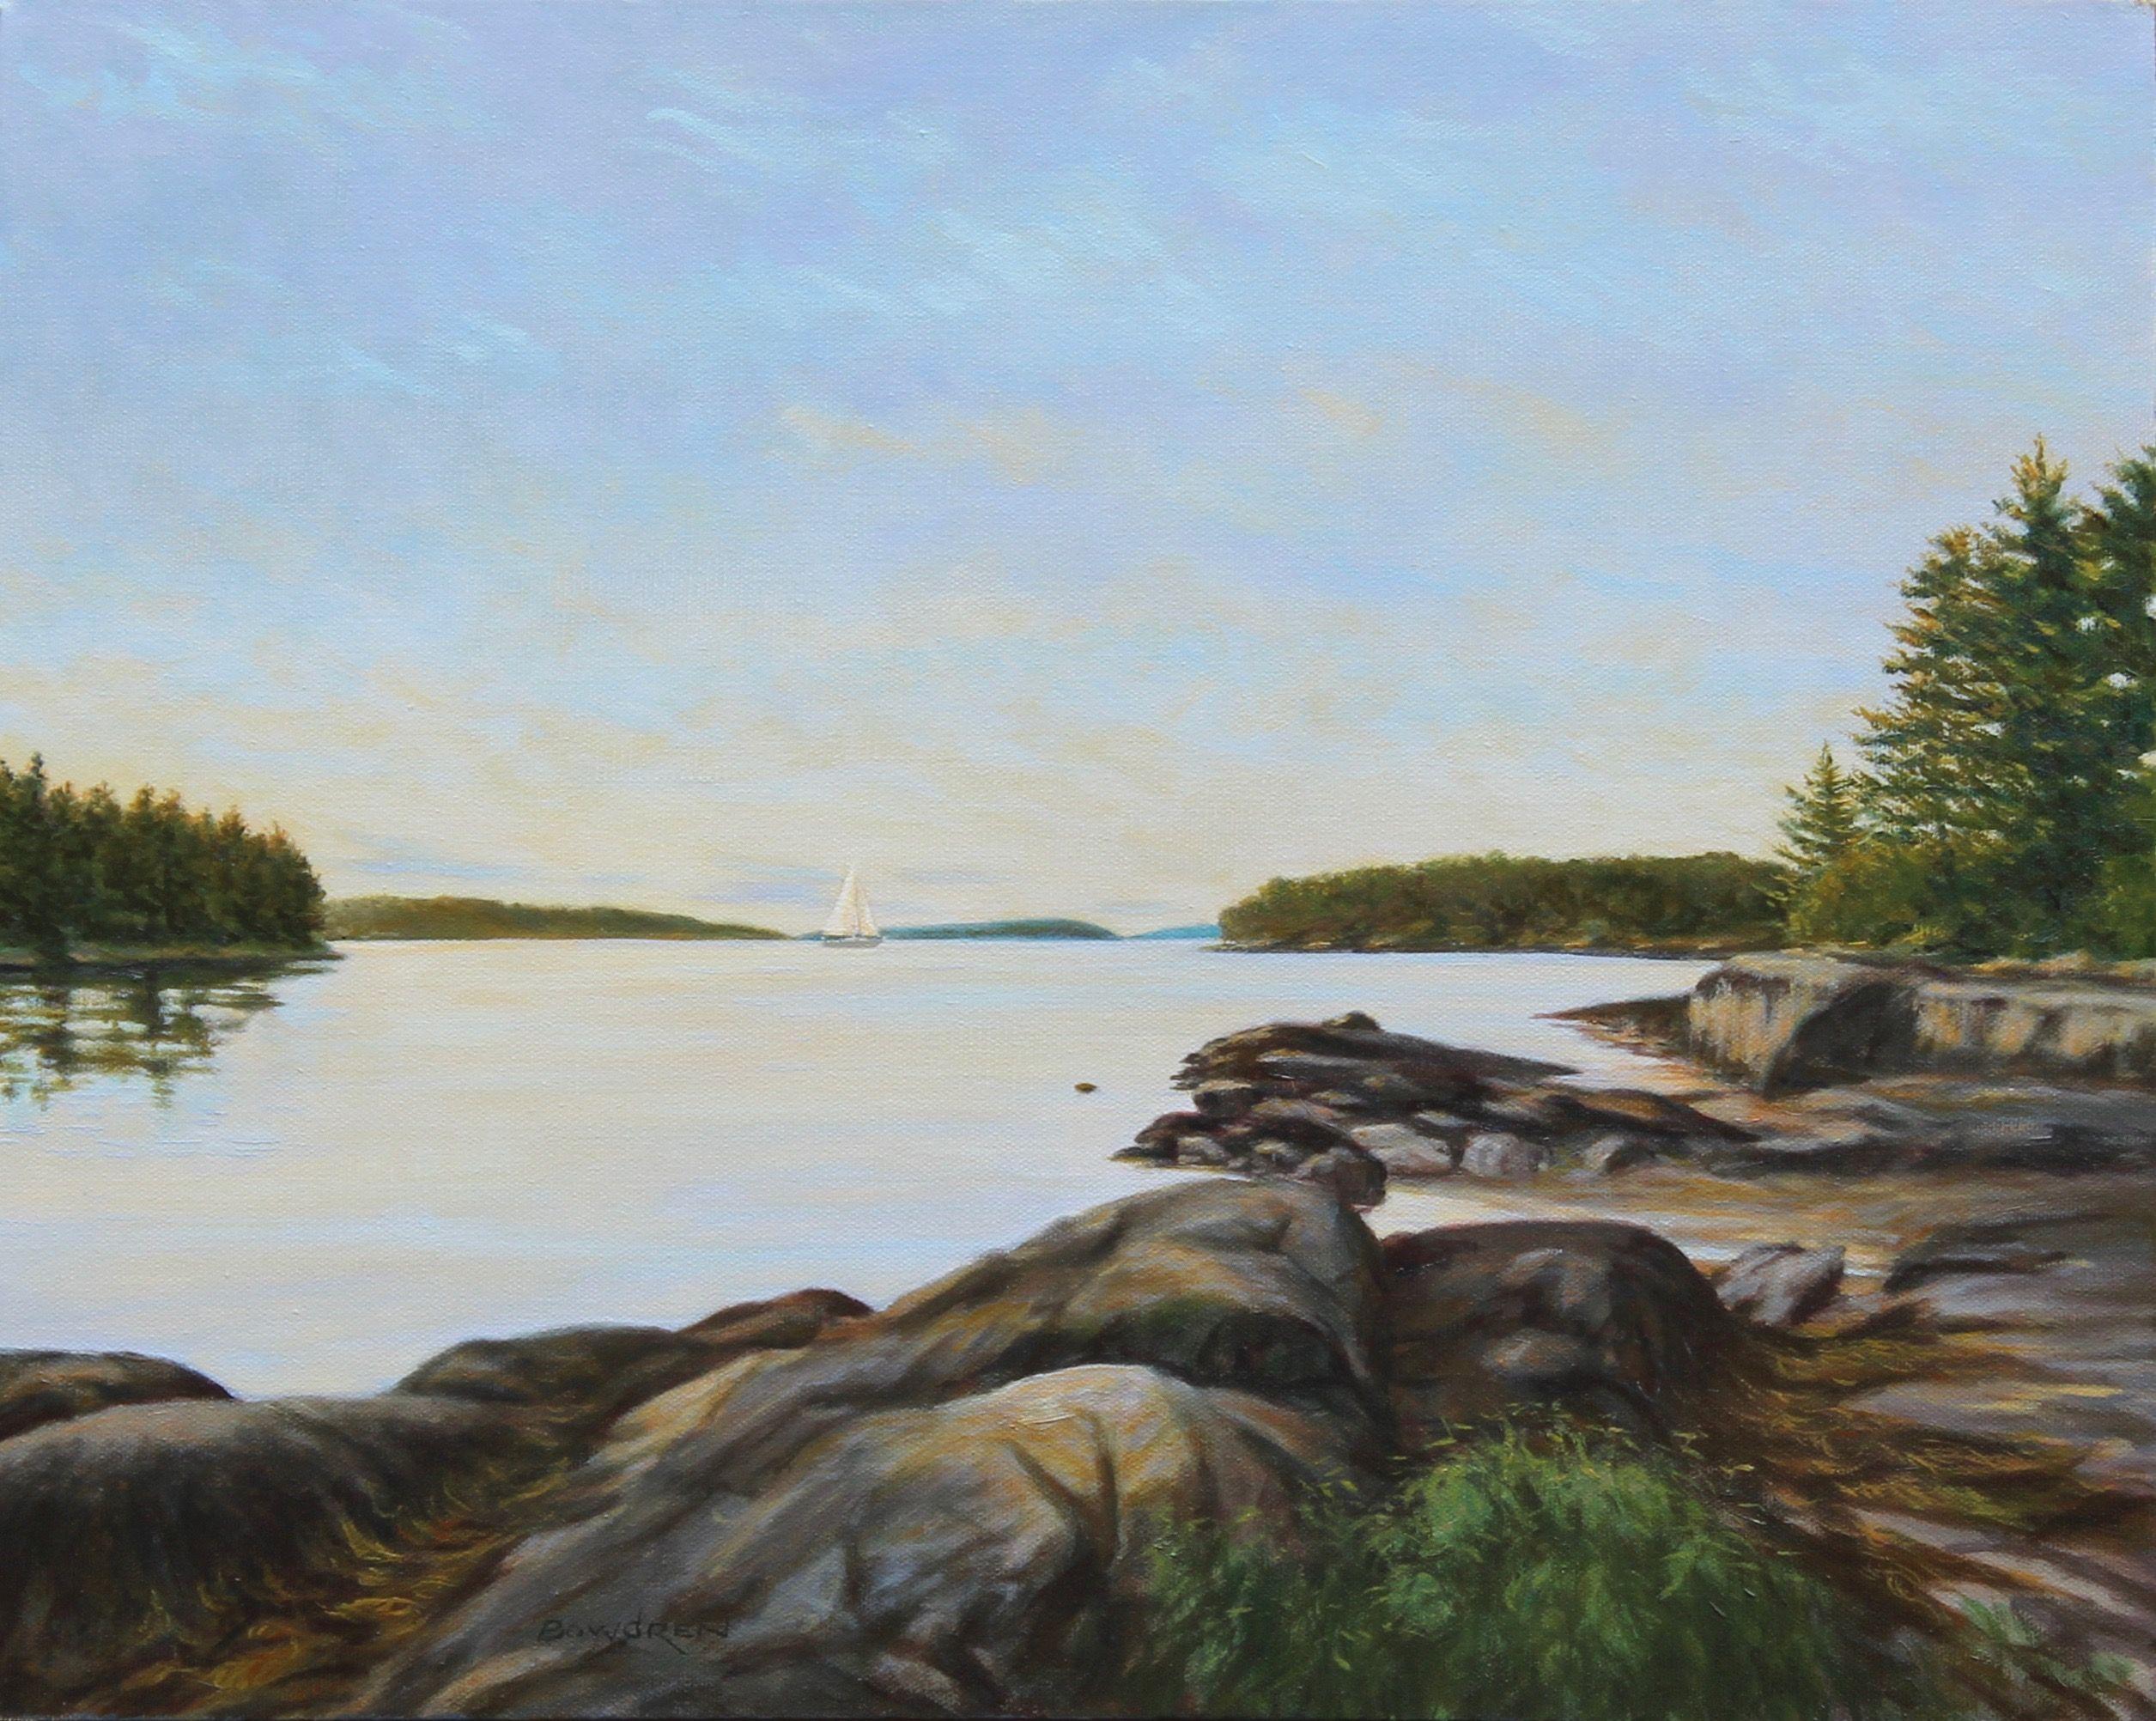 A sailboat in the distance cruising past a  cove with rocks and trees lit up by the afternoon sun.  The scene is in Casco Bay in Maine, USA :: Painting :: Realism :: This piece comes with an official certificate of authenticity signed by the artist